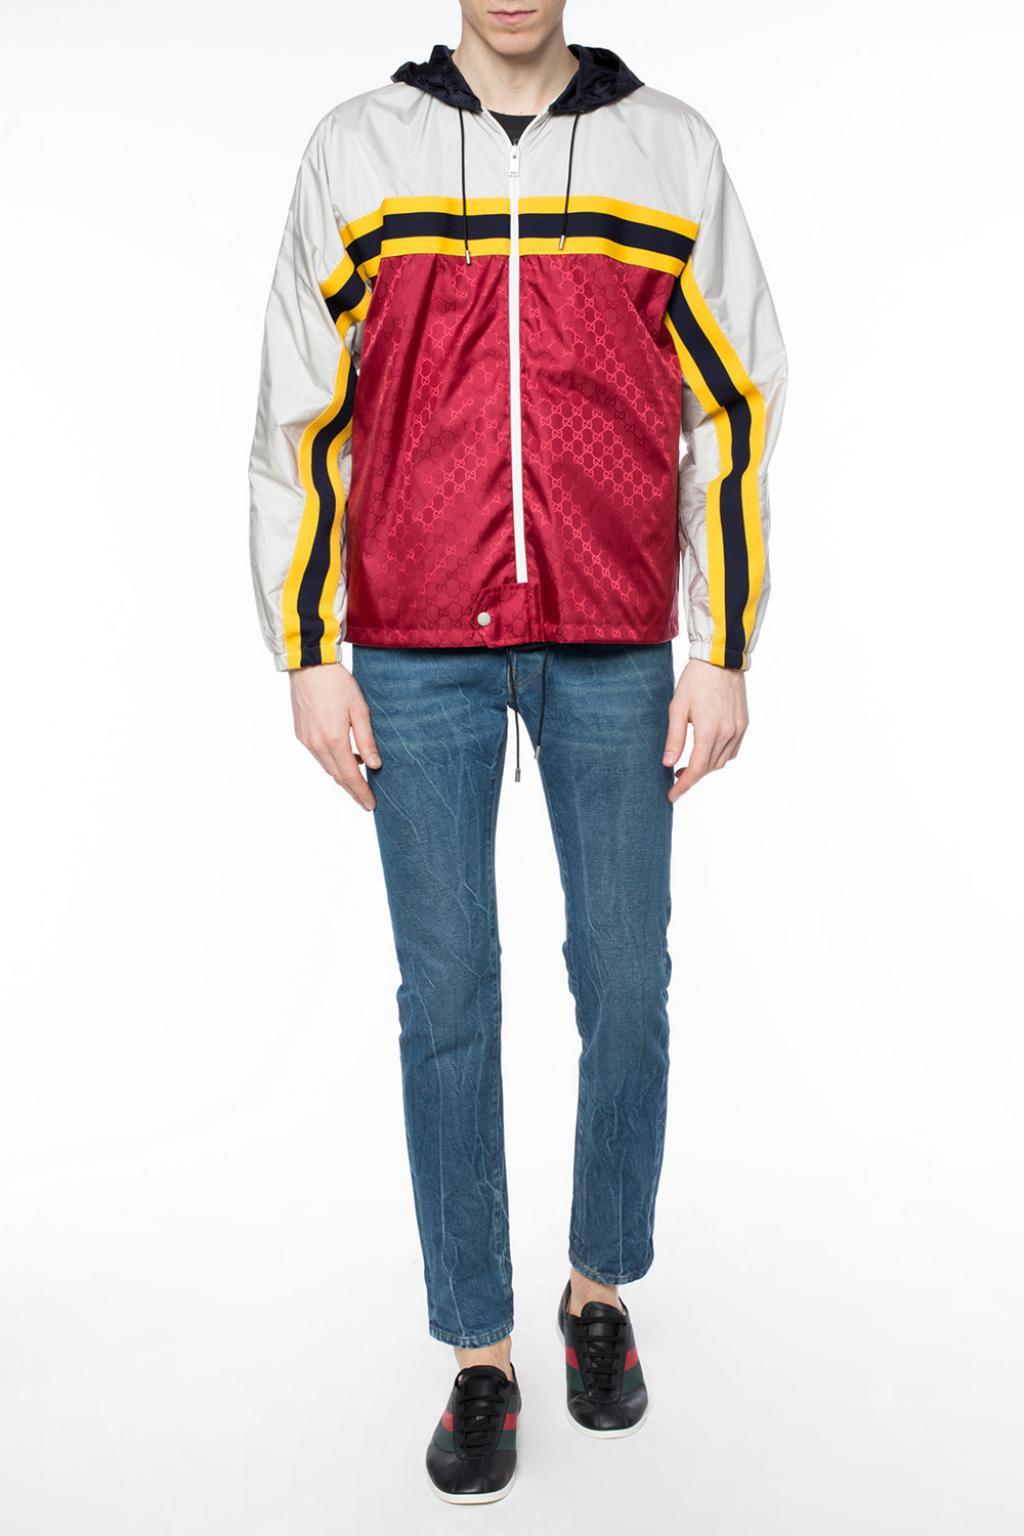 Gucci Synthetic Rain Jacket With Logo for Men - Lyst